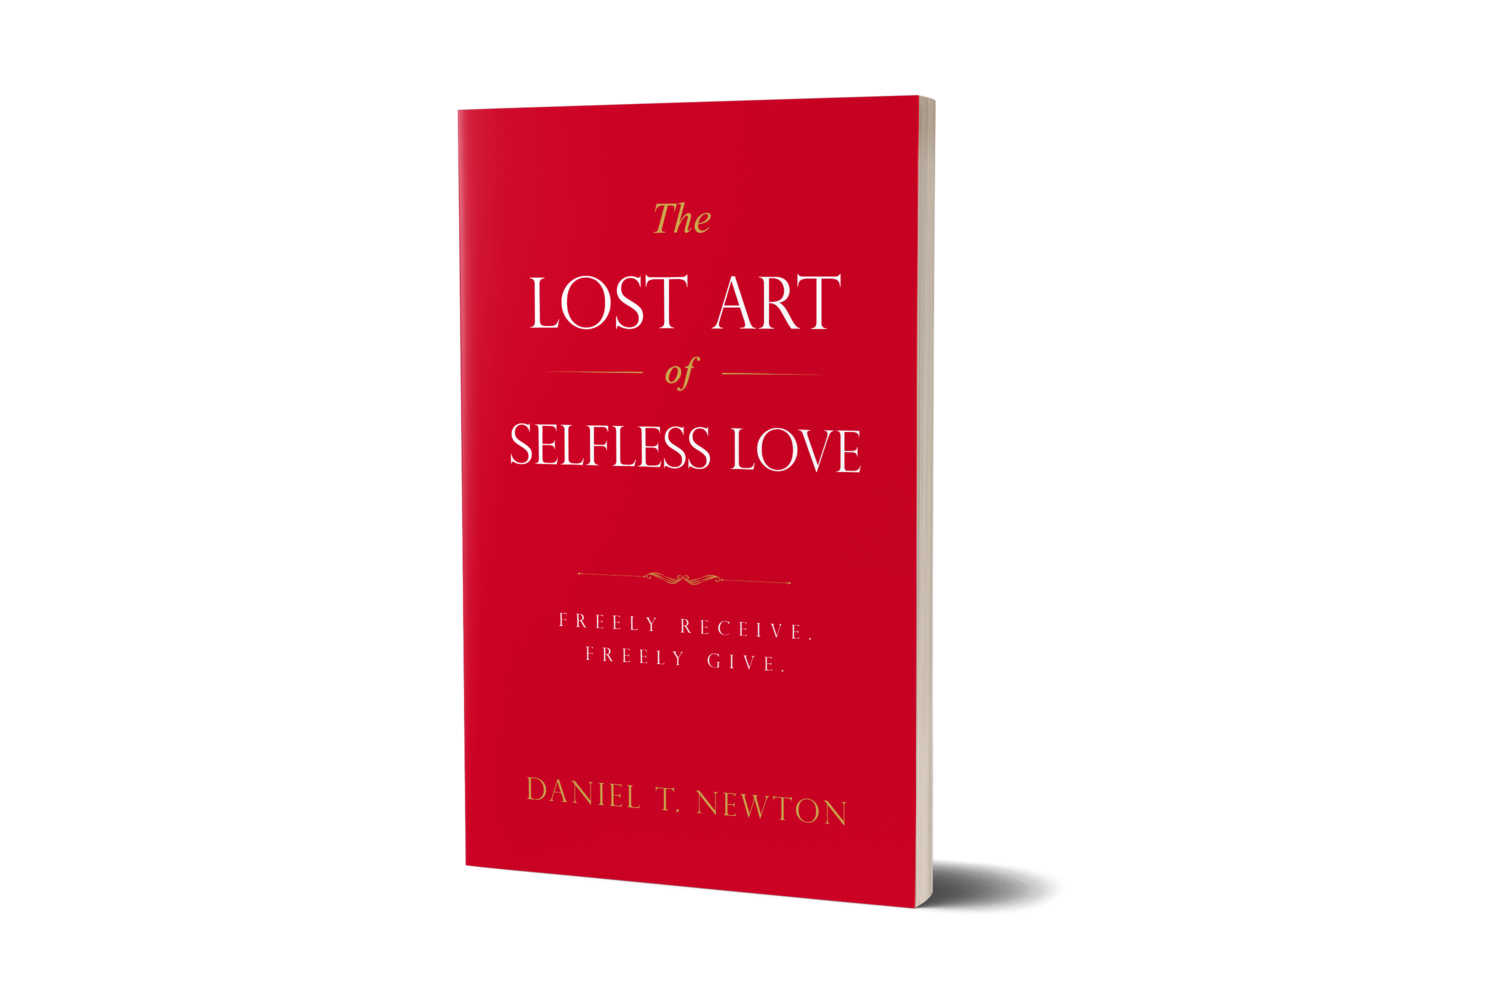 The Lost Art of Selfless Love